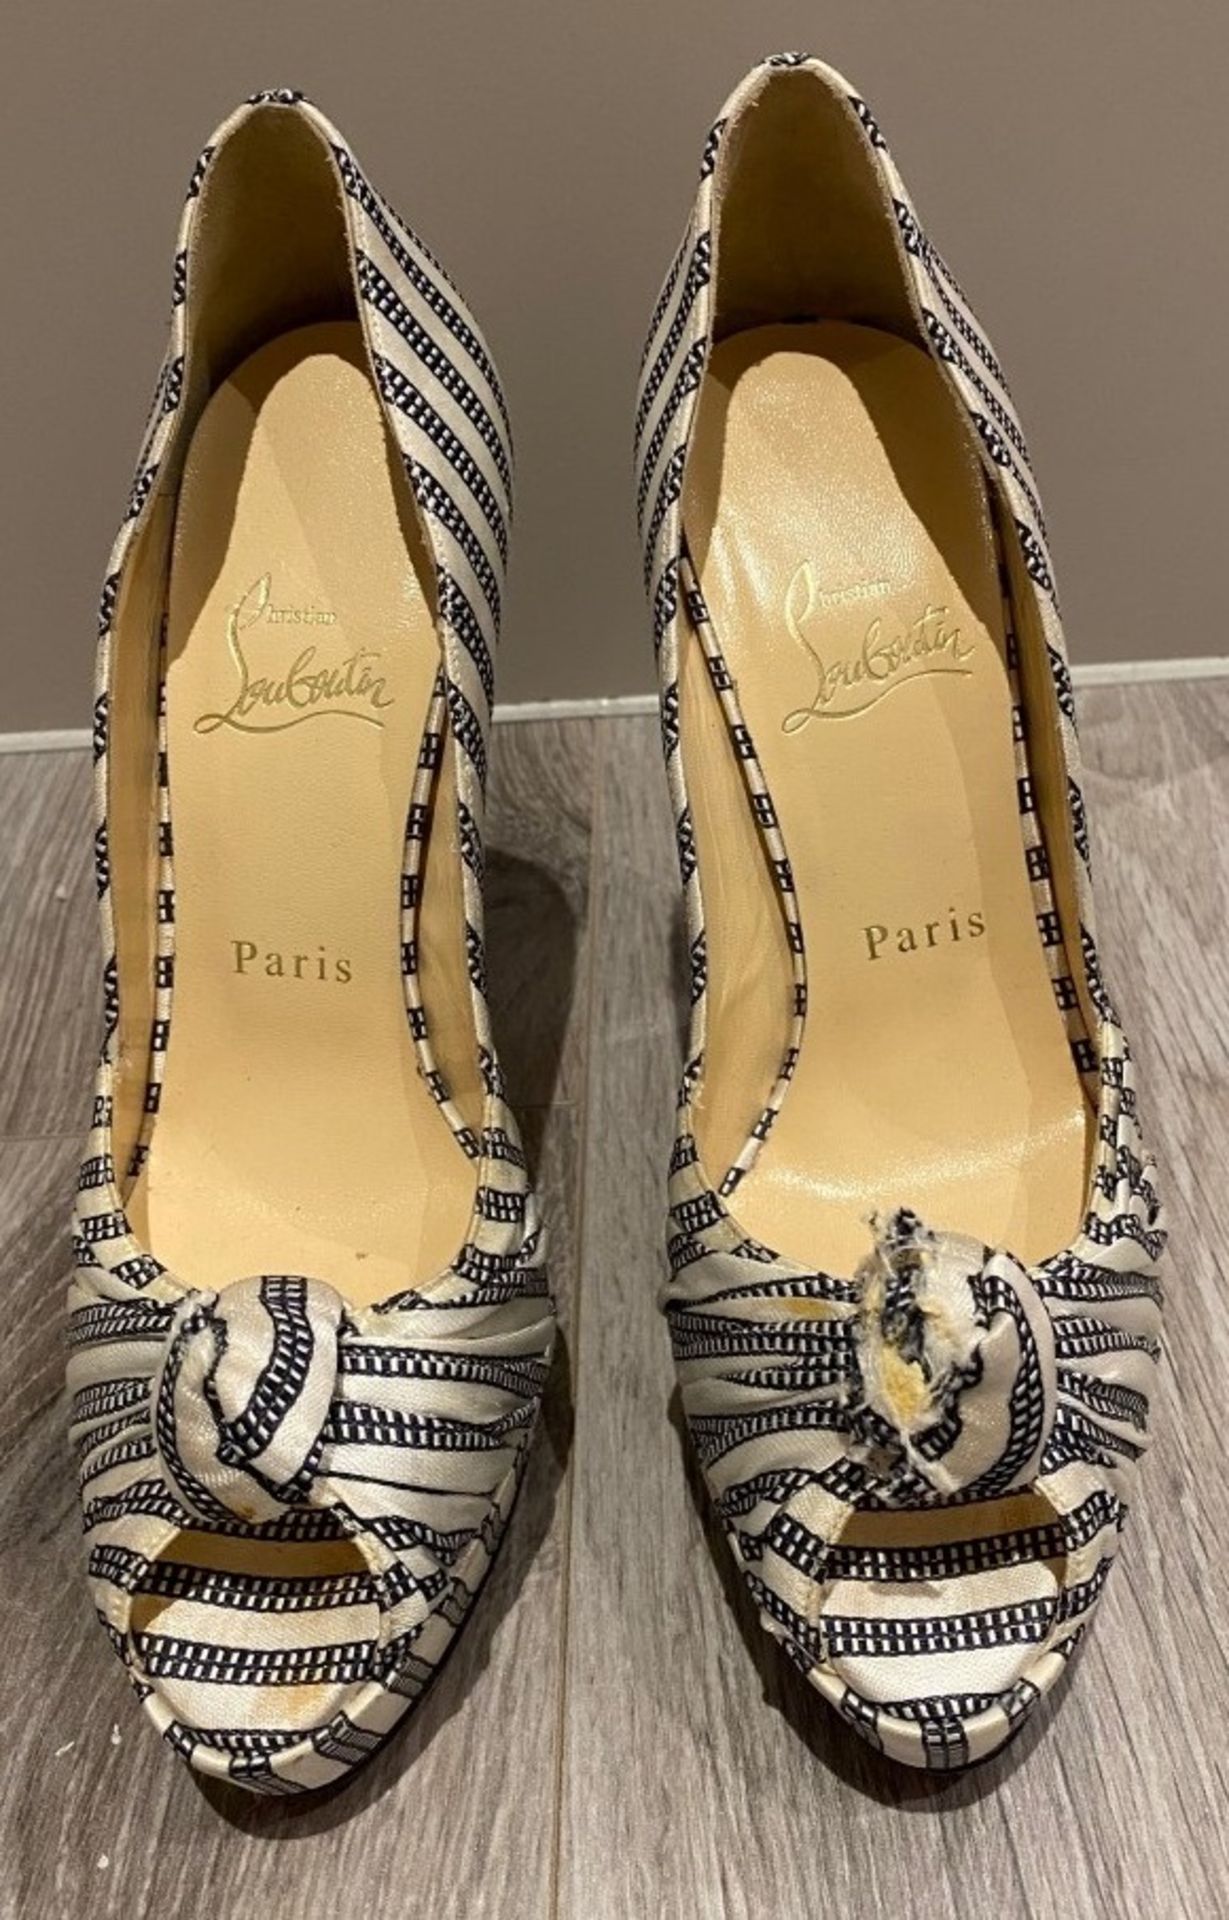 1 x Pair Of Genuine Christain Louboutin High Heel Shoes In Stripe - Size: 37 - Preowned in Very Worn - Image 4 of 5